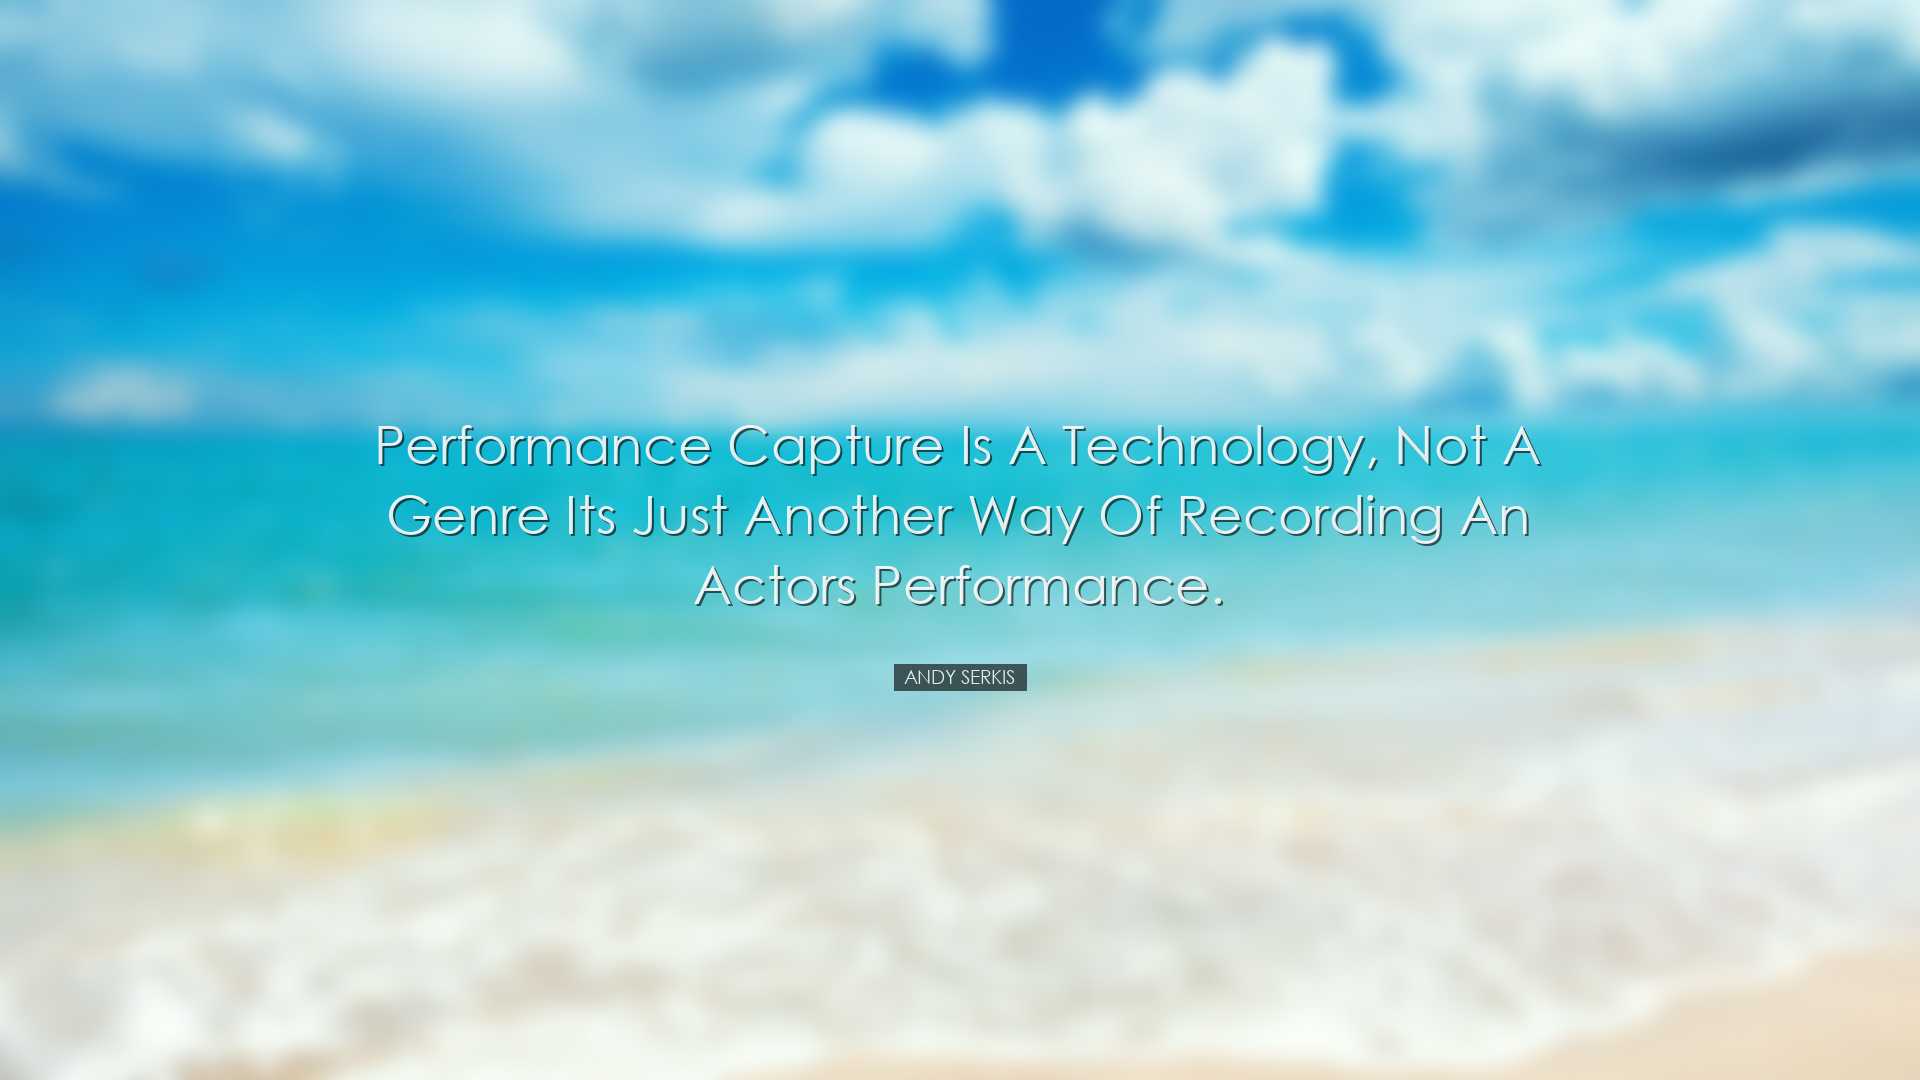 Performance capture is a technology, not a genre its just another